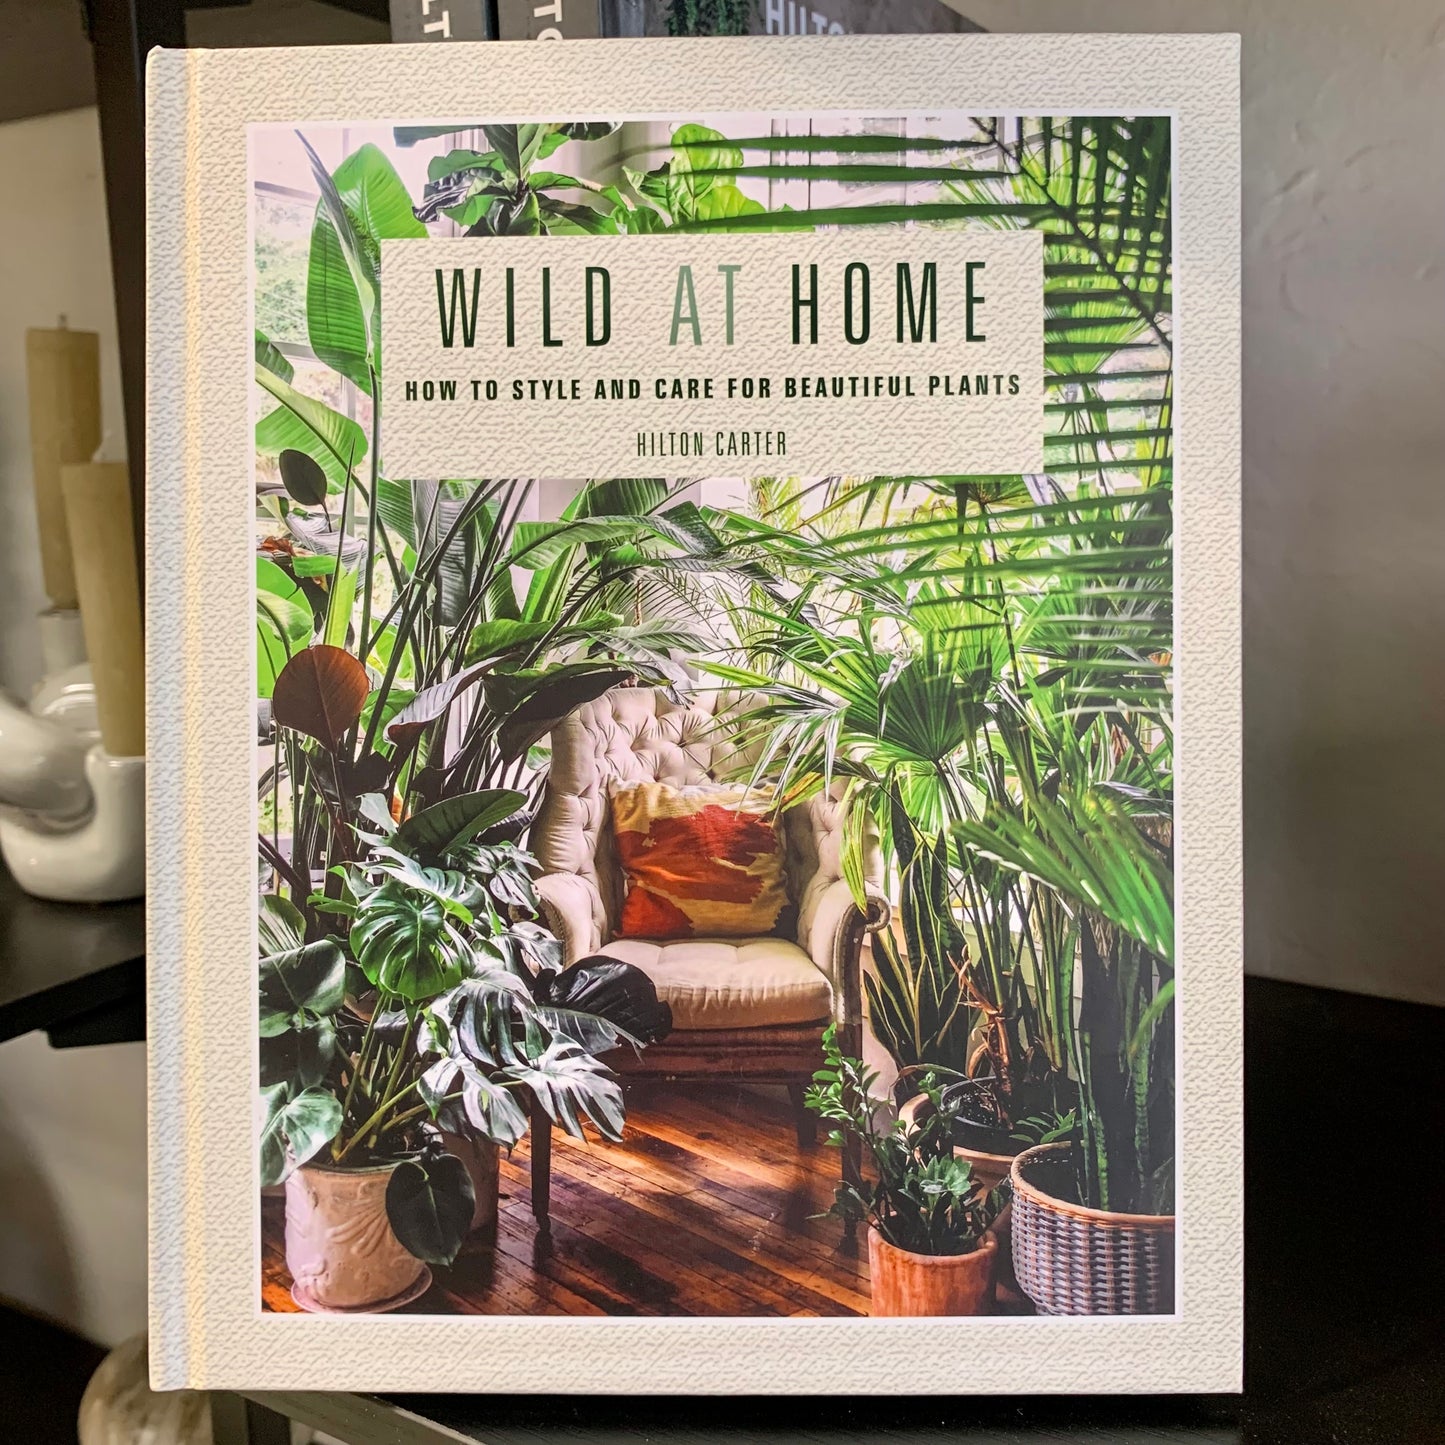 Wild at Home Book by Hilton Carter